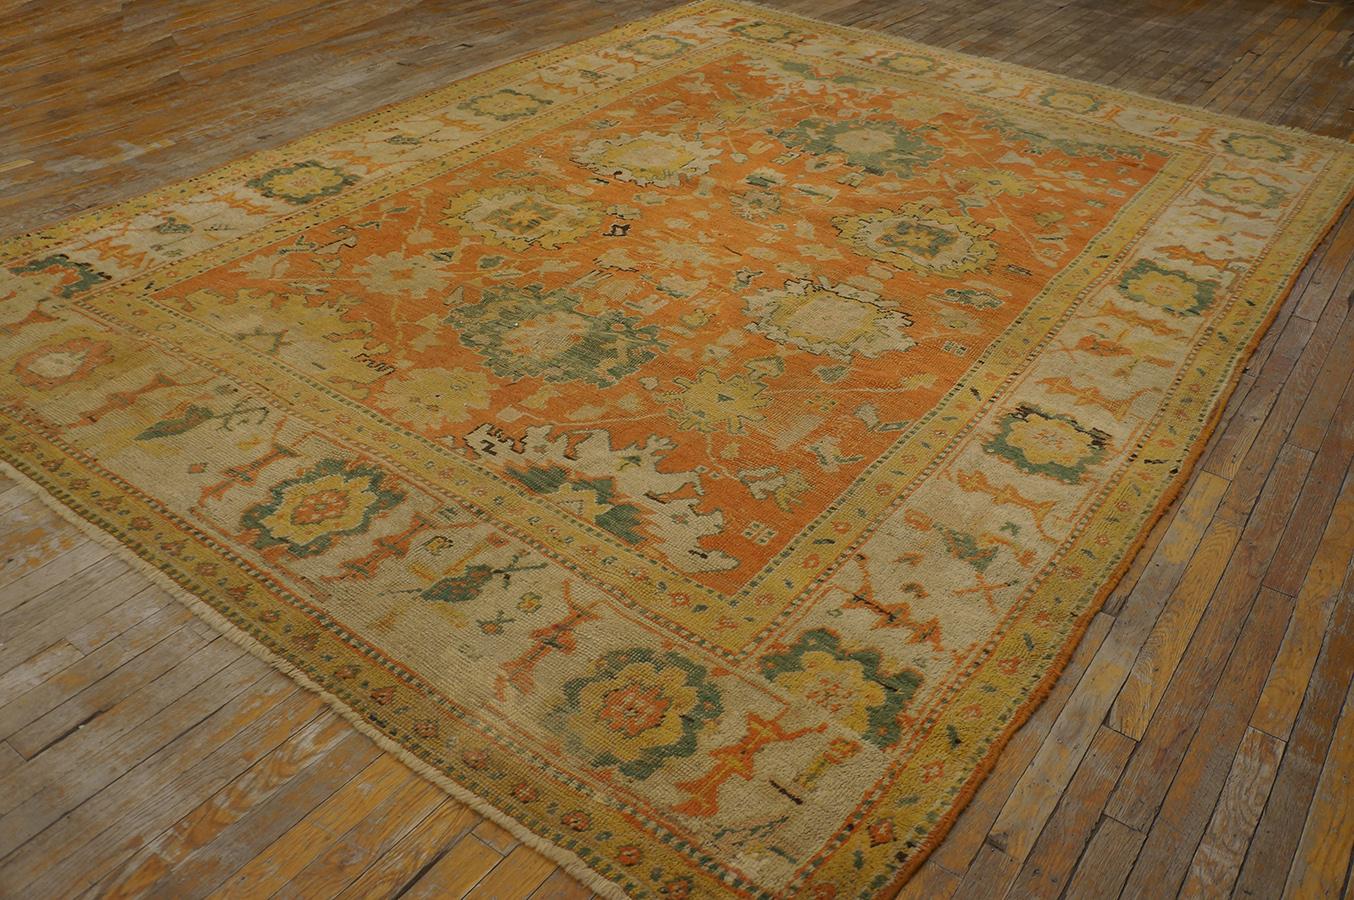 Late 19th Century Turkish Oushak Carpet ( 8'4''x 11'2'' - 254 x 340 ) In Good Condition For Sale In New York, NY